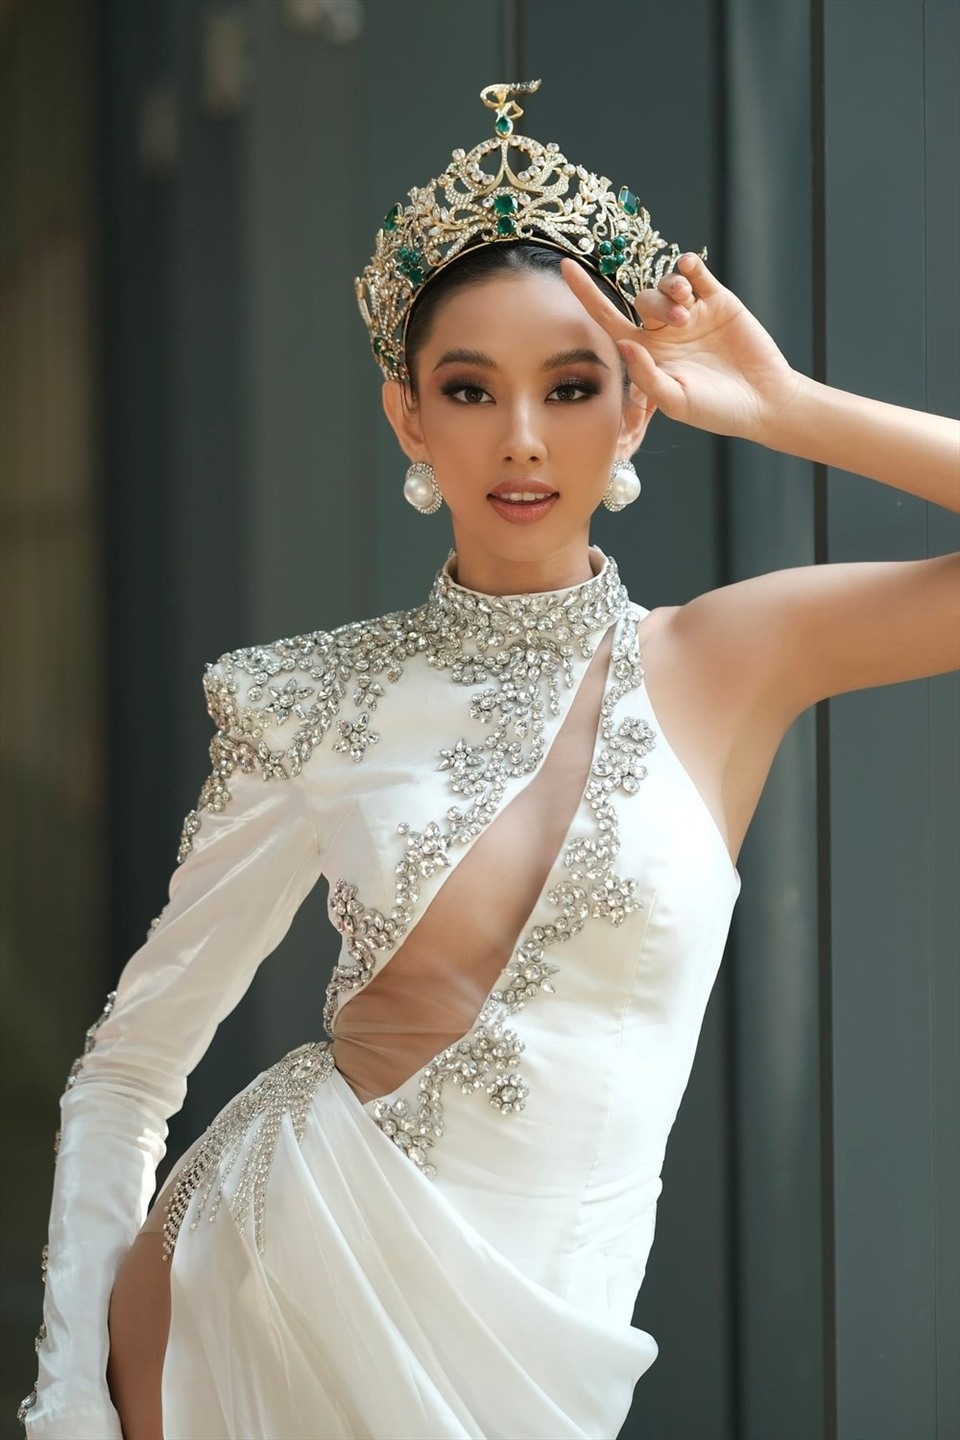 well-deserved reputation for vietnam at global beauty competitions picture 1